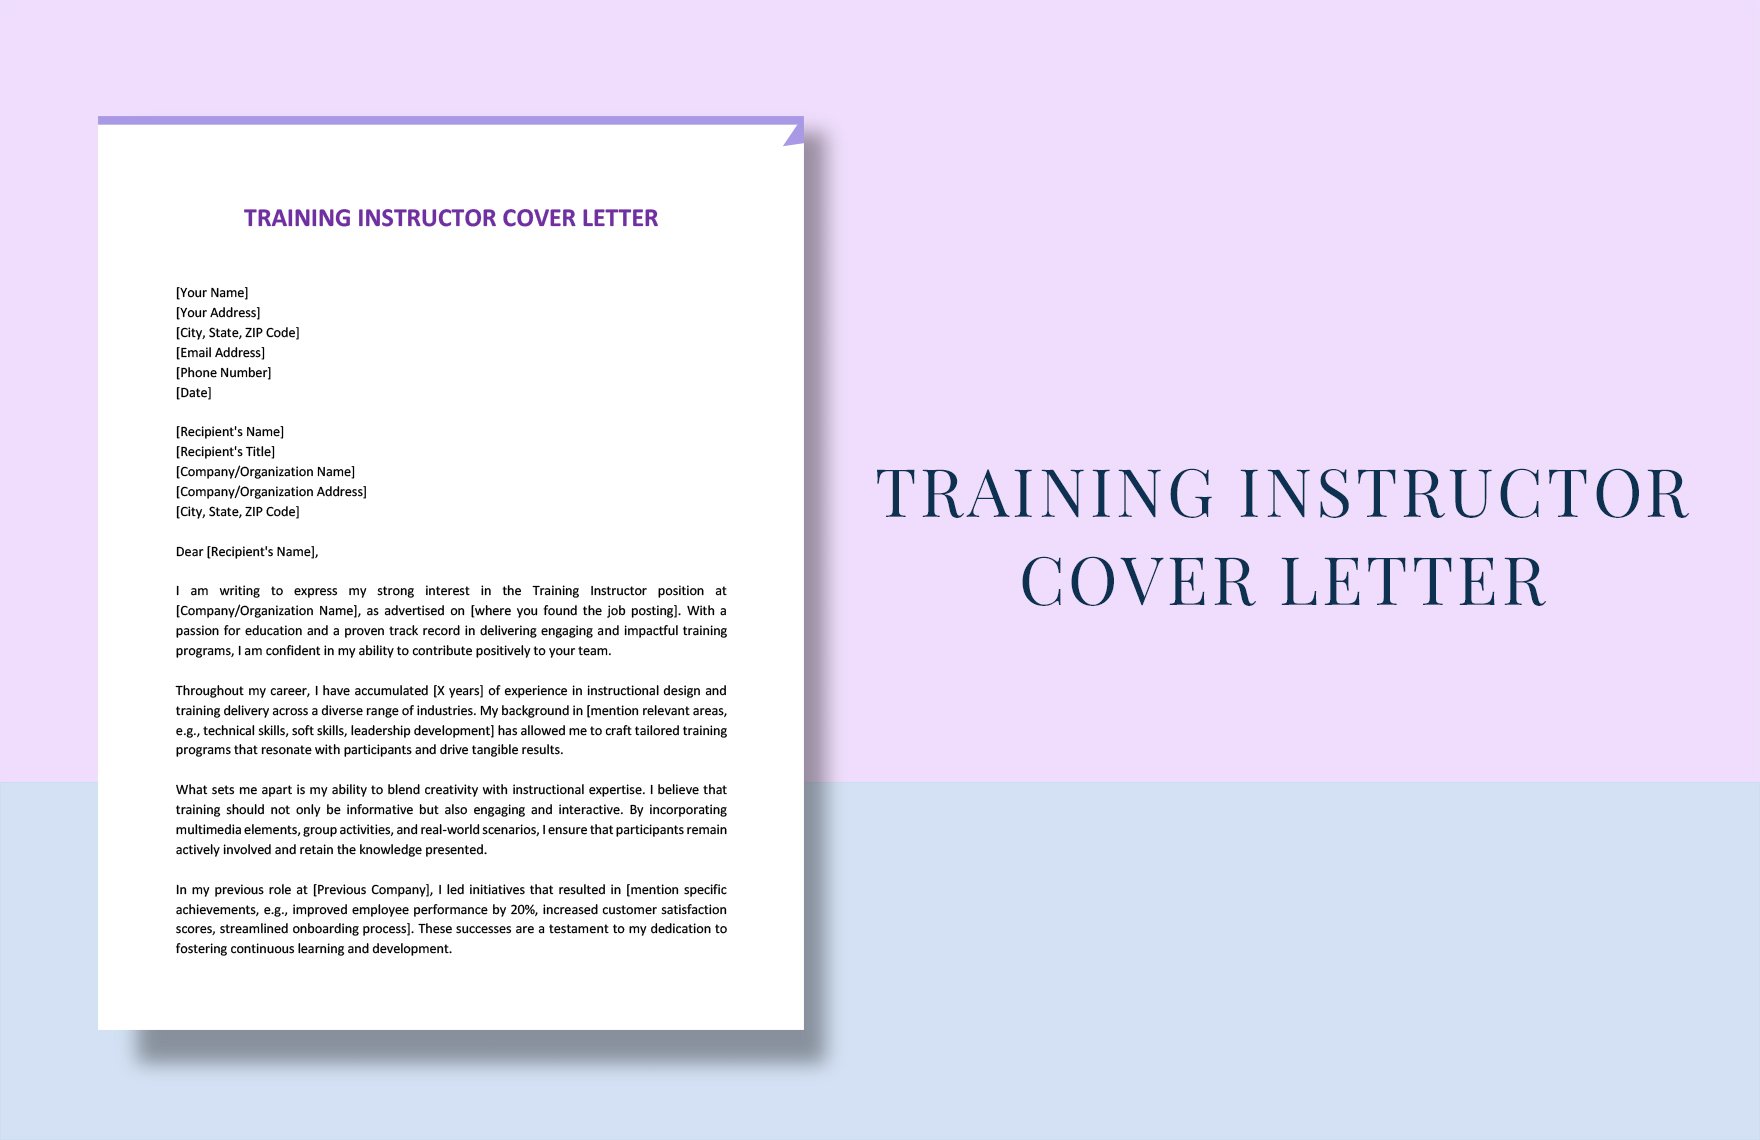 Training Instructor Cover Letter